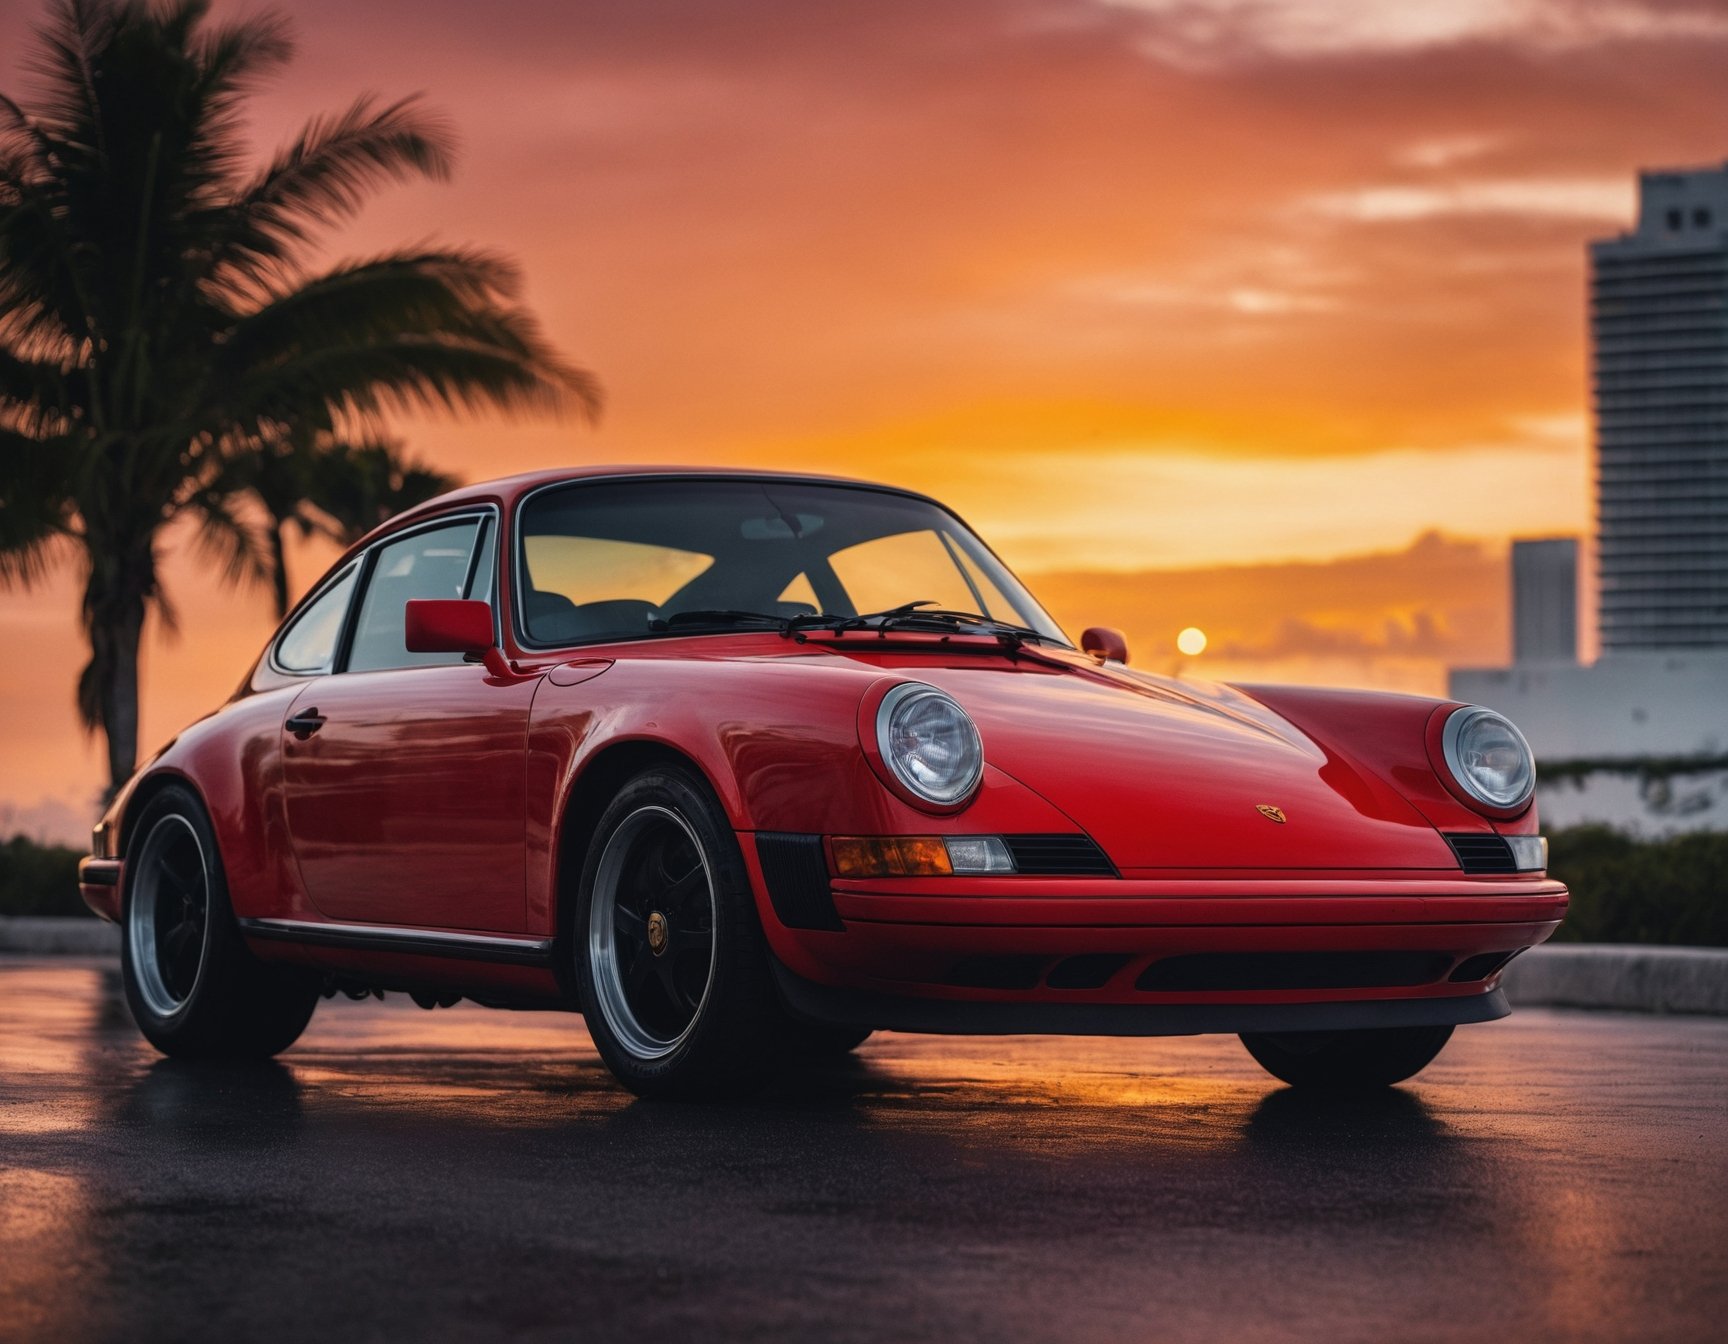 cinematic photo of red Porsche in Miami, sunset, high detailed